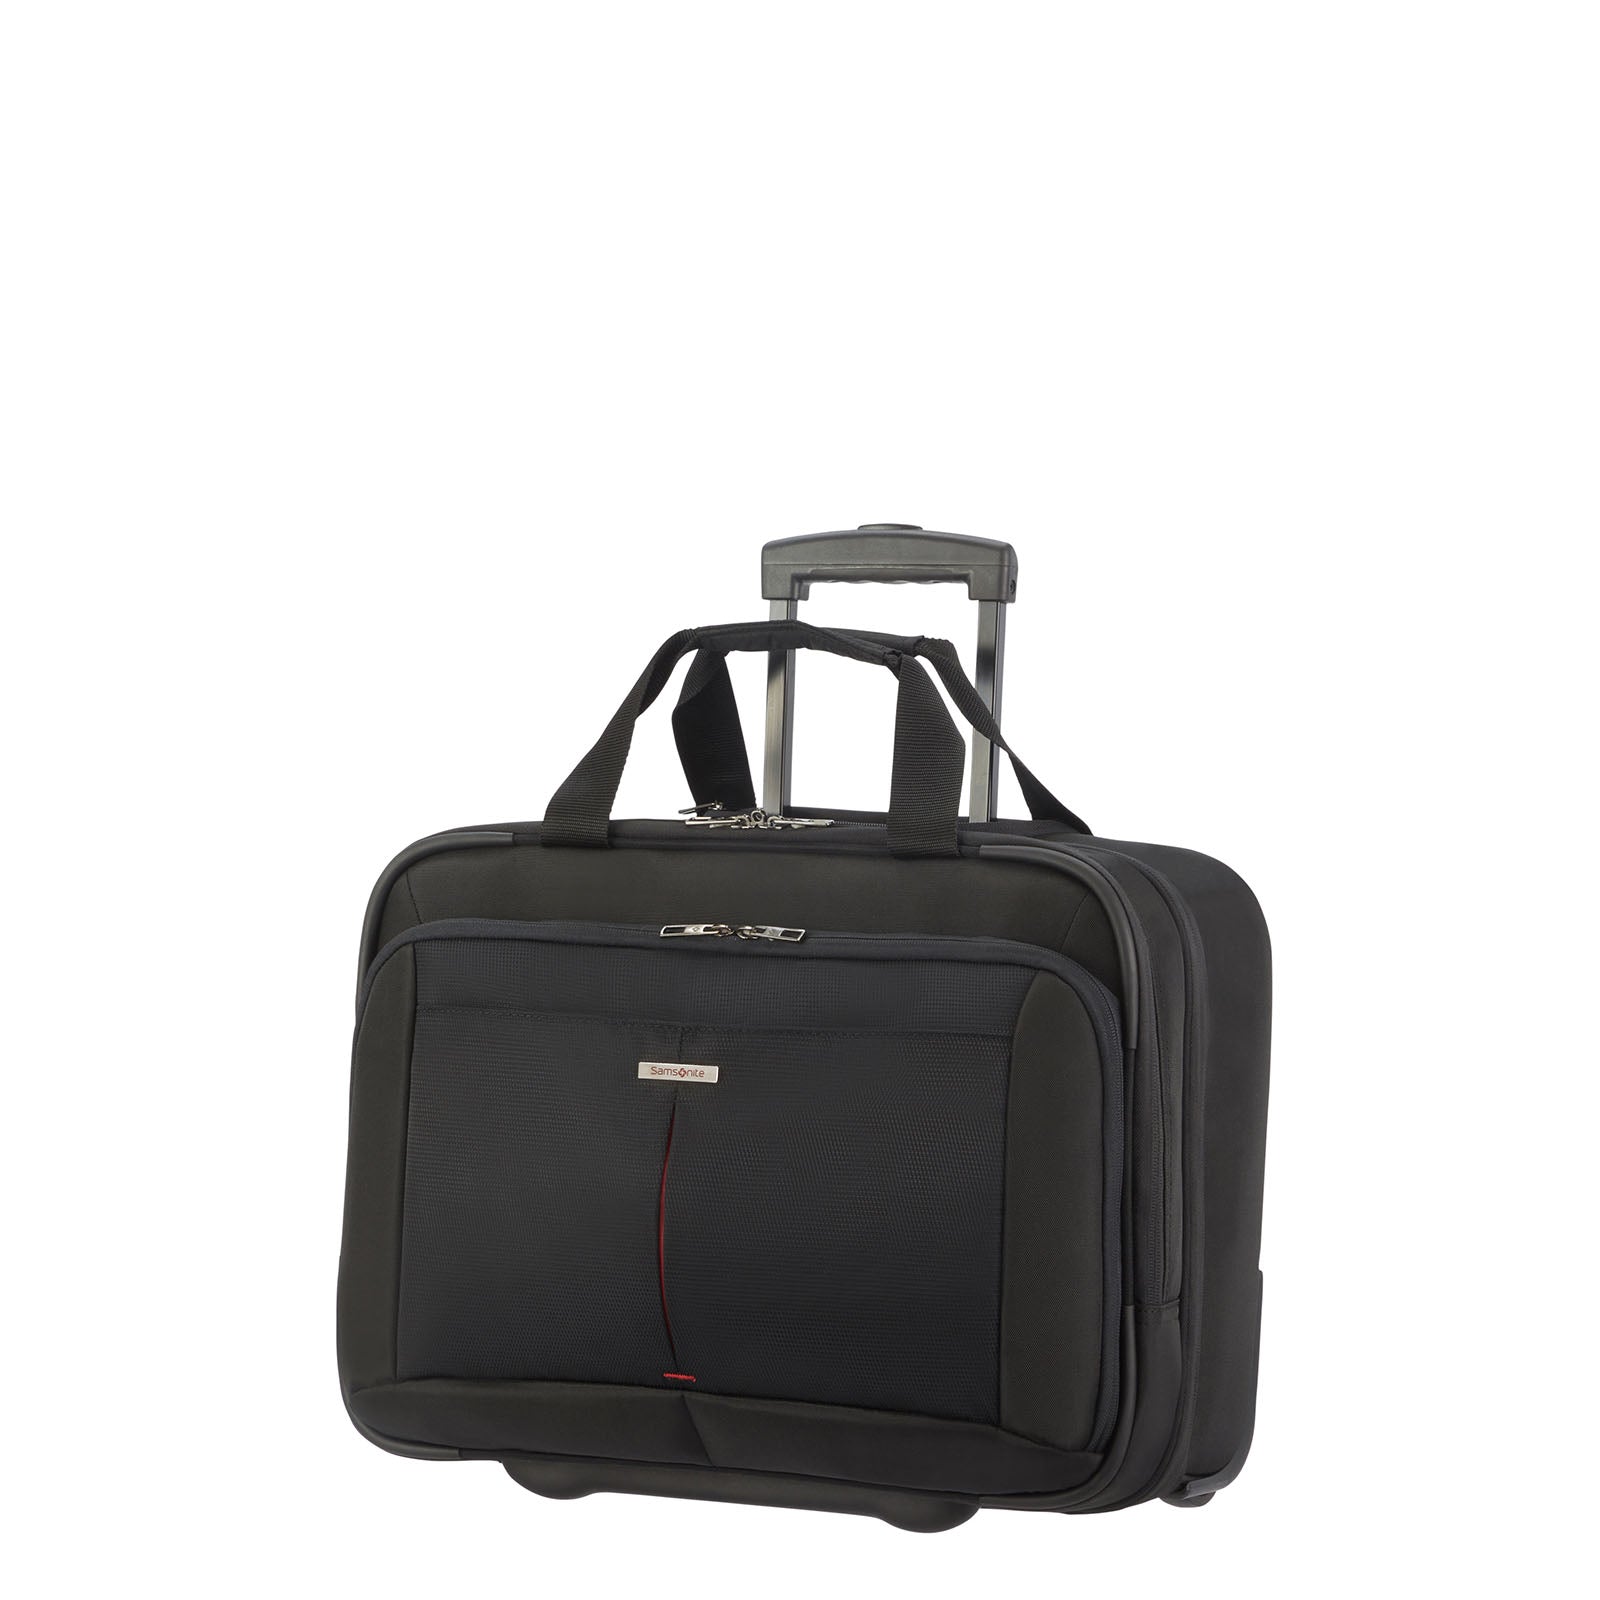 Samsonite-Guardit-2-17-Inch-Rolling-Tote-Black-Front-Angle